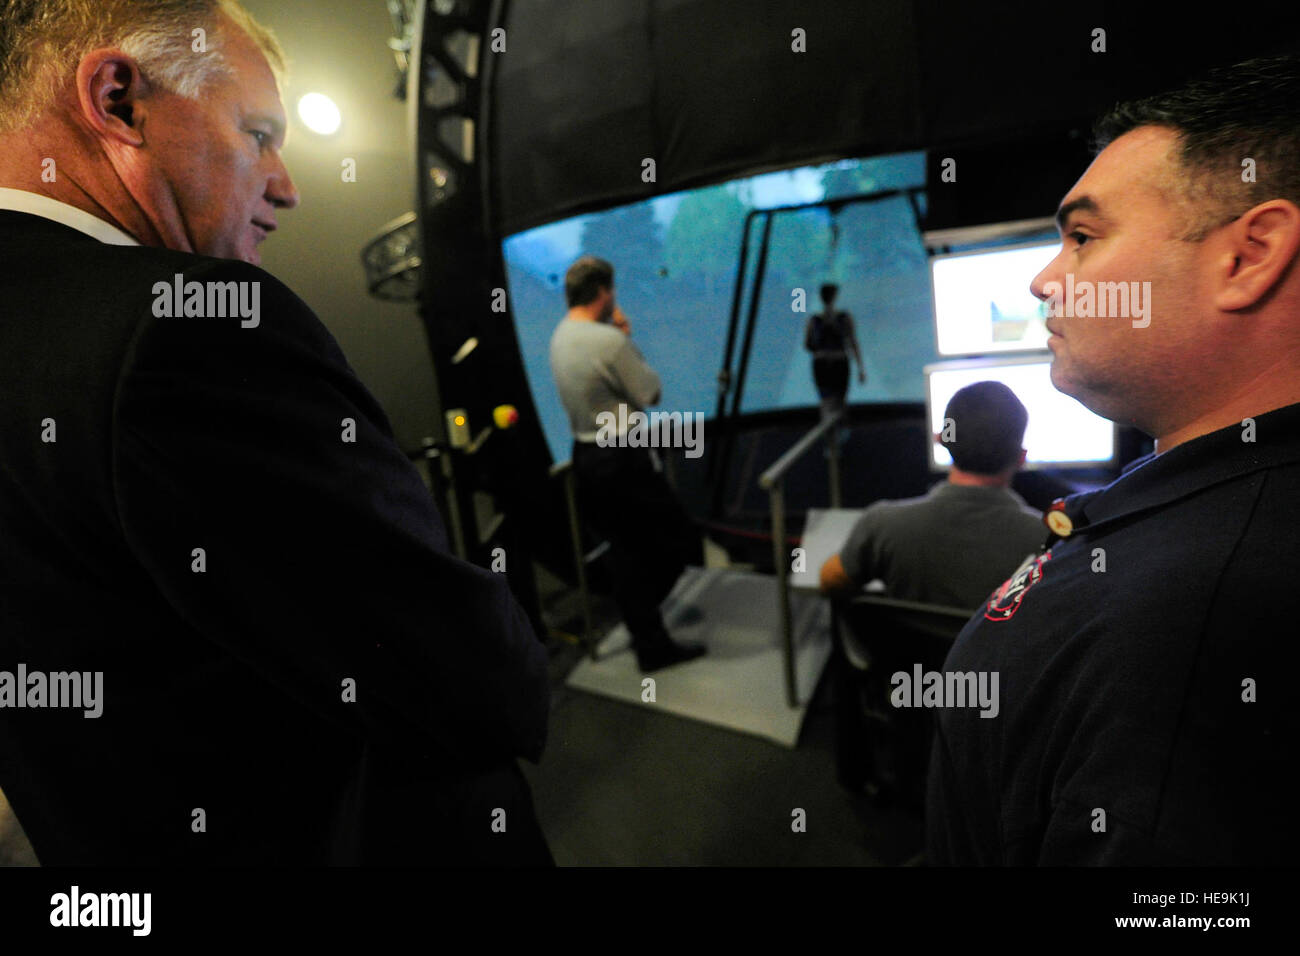 Deputy Secretary of Defense William J. Lynn III tours the military performance laboratory at the Center for the Intrepid, Brooke Army Medical Center, San Antonio, Texas, Sept. 28, 2011.  Tech. Sgt. Jacob N. Bailey, U.S. Air Force) (Released) Stock Photo